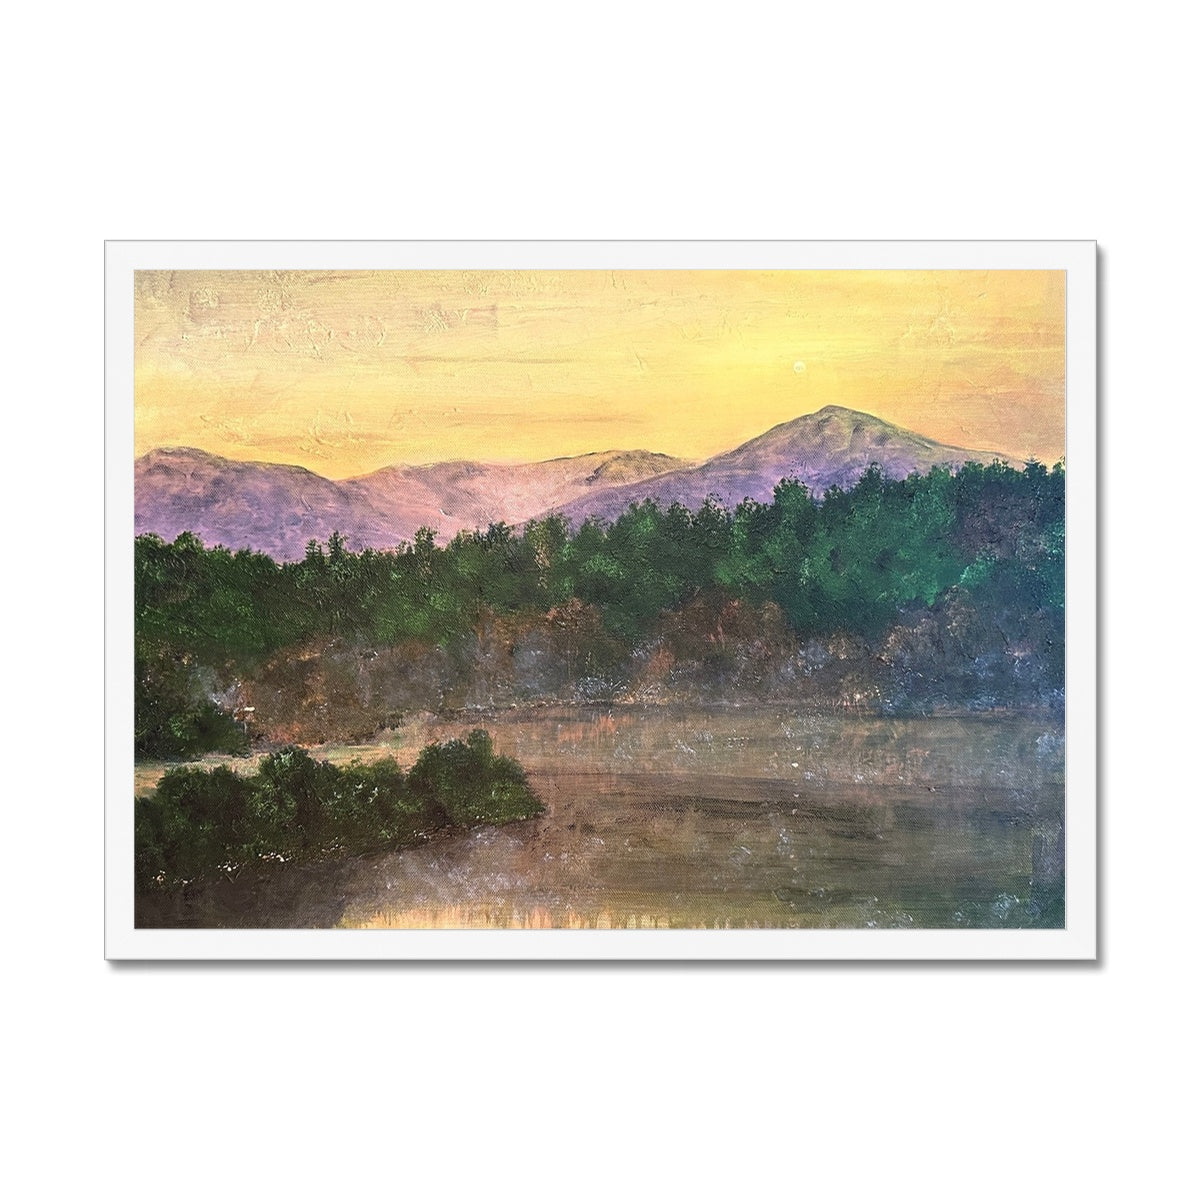 Ben Tee Invergarry Painting | Framed Prints From Scotland-Framed Prints-Scottish Lochs & Mountains Art Gallery-A2 Landscape-White Frame-Paintings, Prints, Homeware, Art Gifts From Scotland By Scottish Artist Kevin Hunter